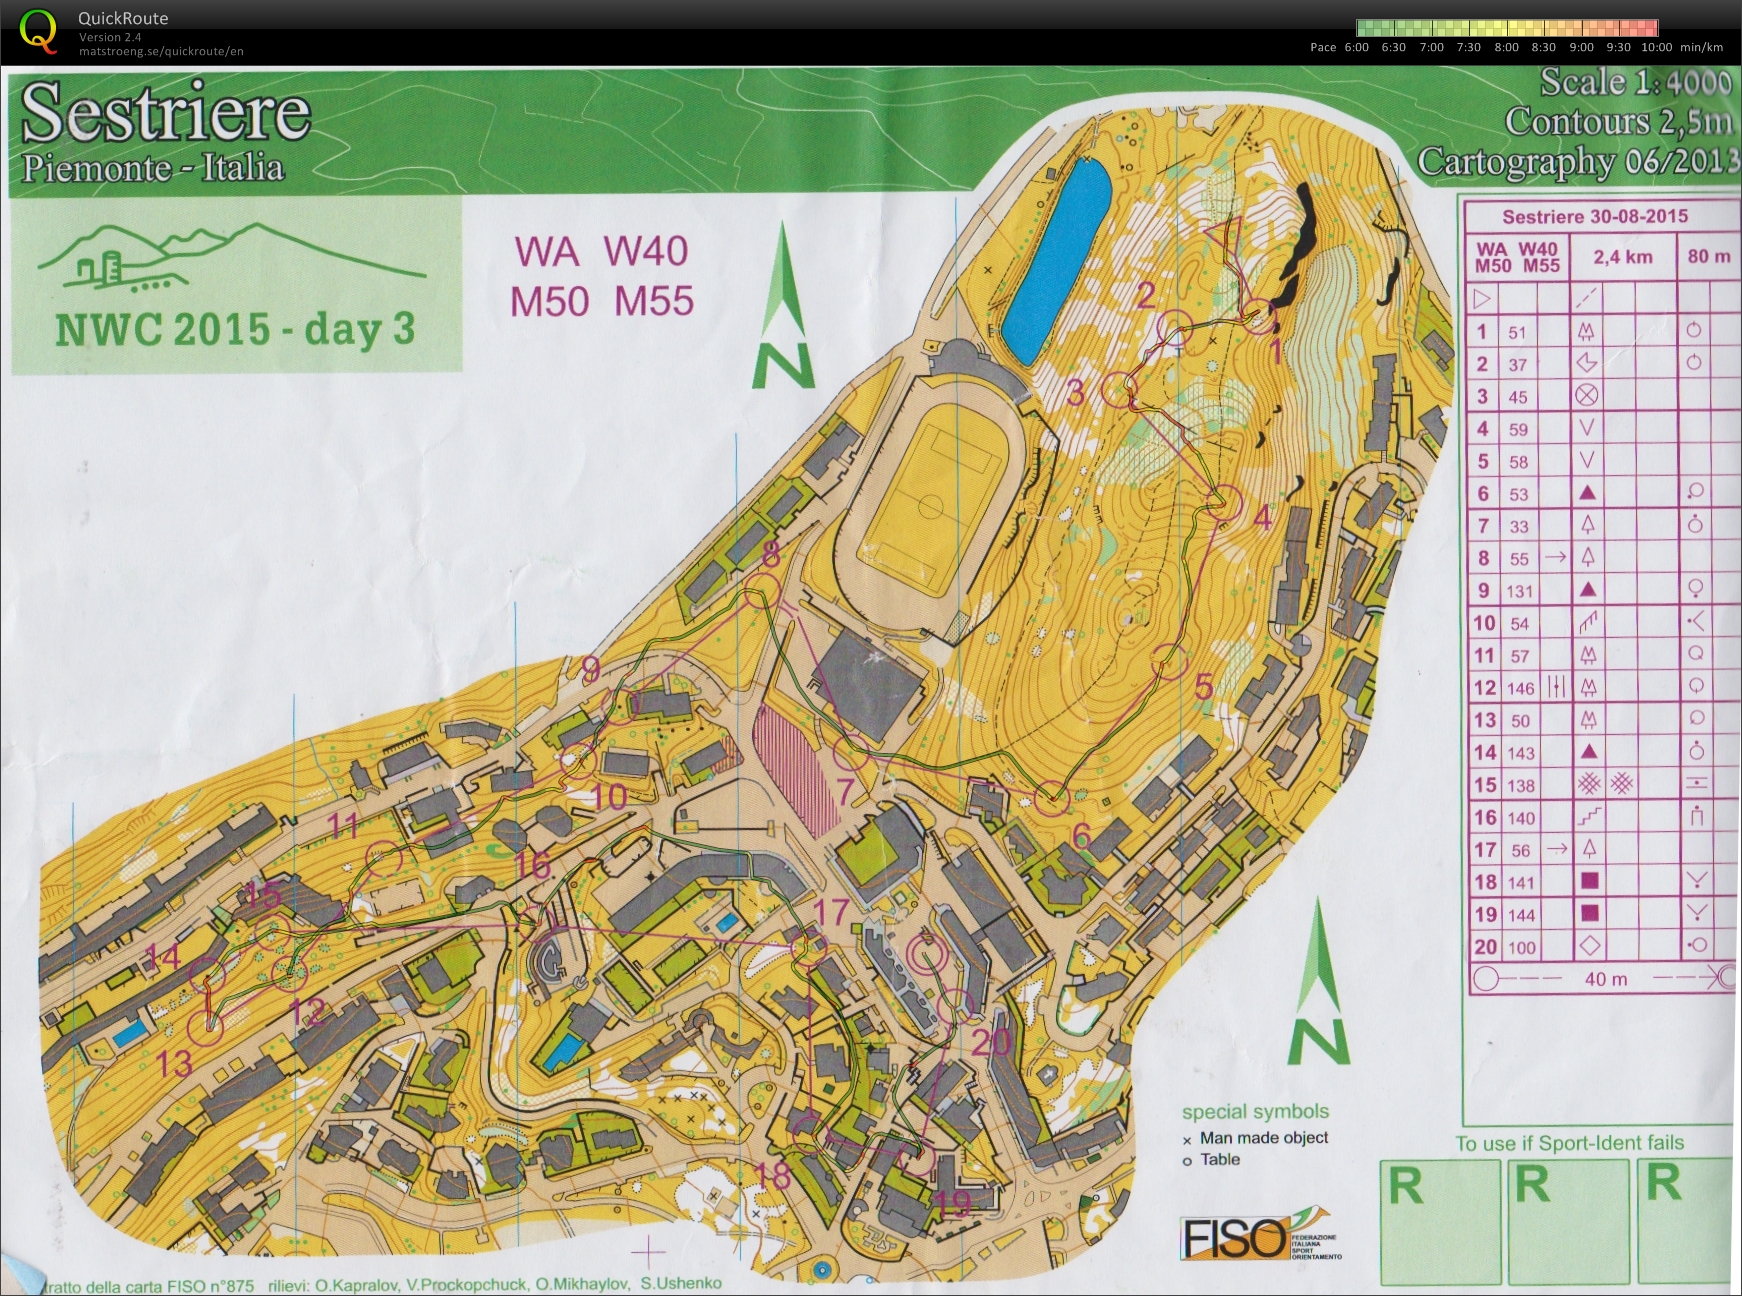 North west cup - Sestriere - Day 3 - M50 (2015-08-30)